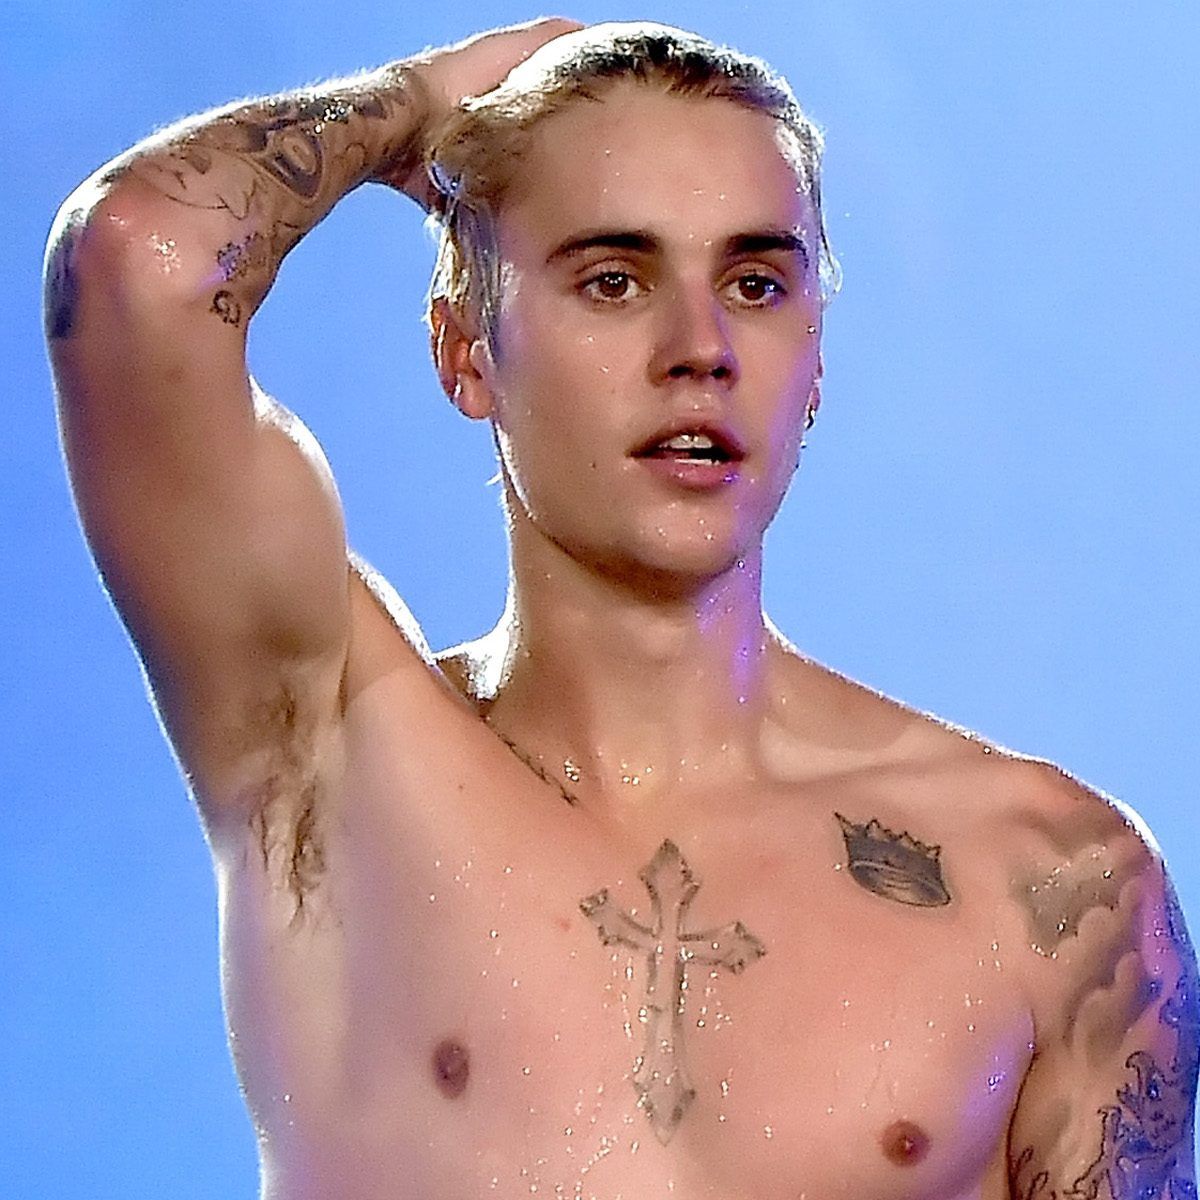 charles higdon recommends justin bieber biting nipple pic